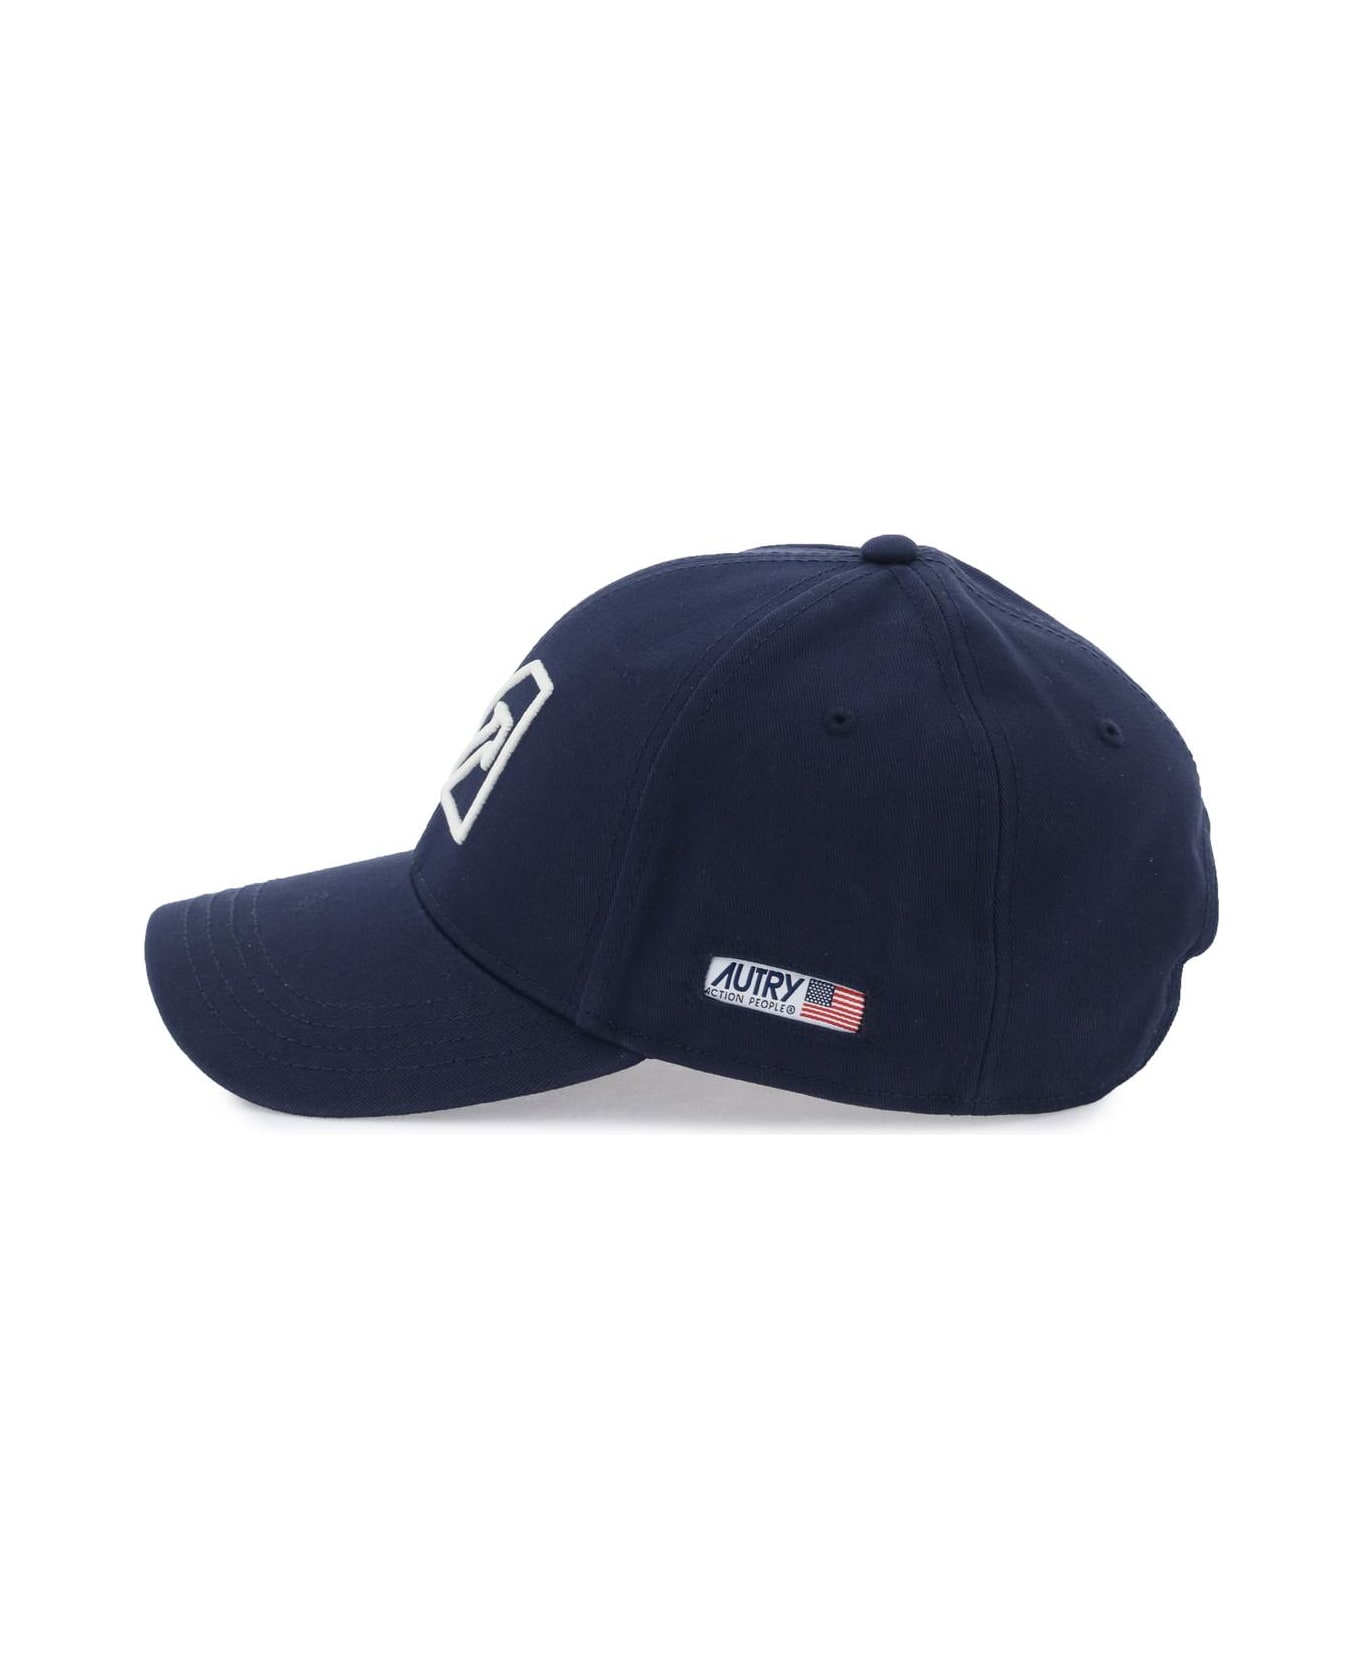 Autry Baseball Cap With Embroidered Logo - BLUE PATCH (Blue)